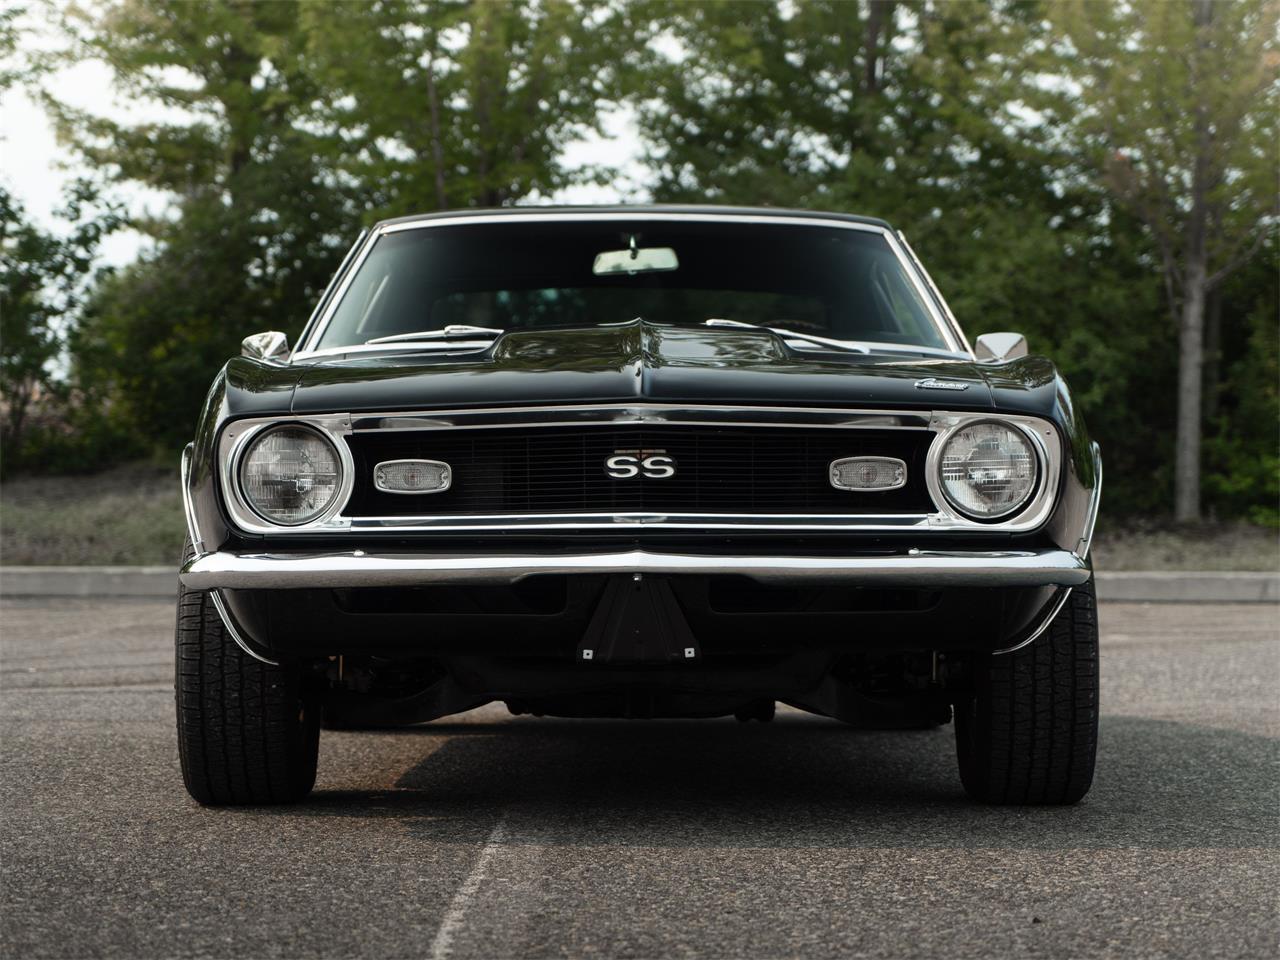 1960's american automobile industry was one of the first mass-produced v-8 automobiles The 1969 Camaro SS model was launched and became an icon of the 1960s 27258485 1968 chevrolet camaro std